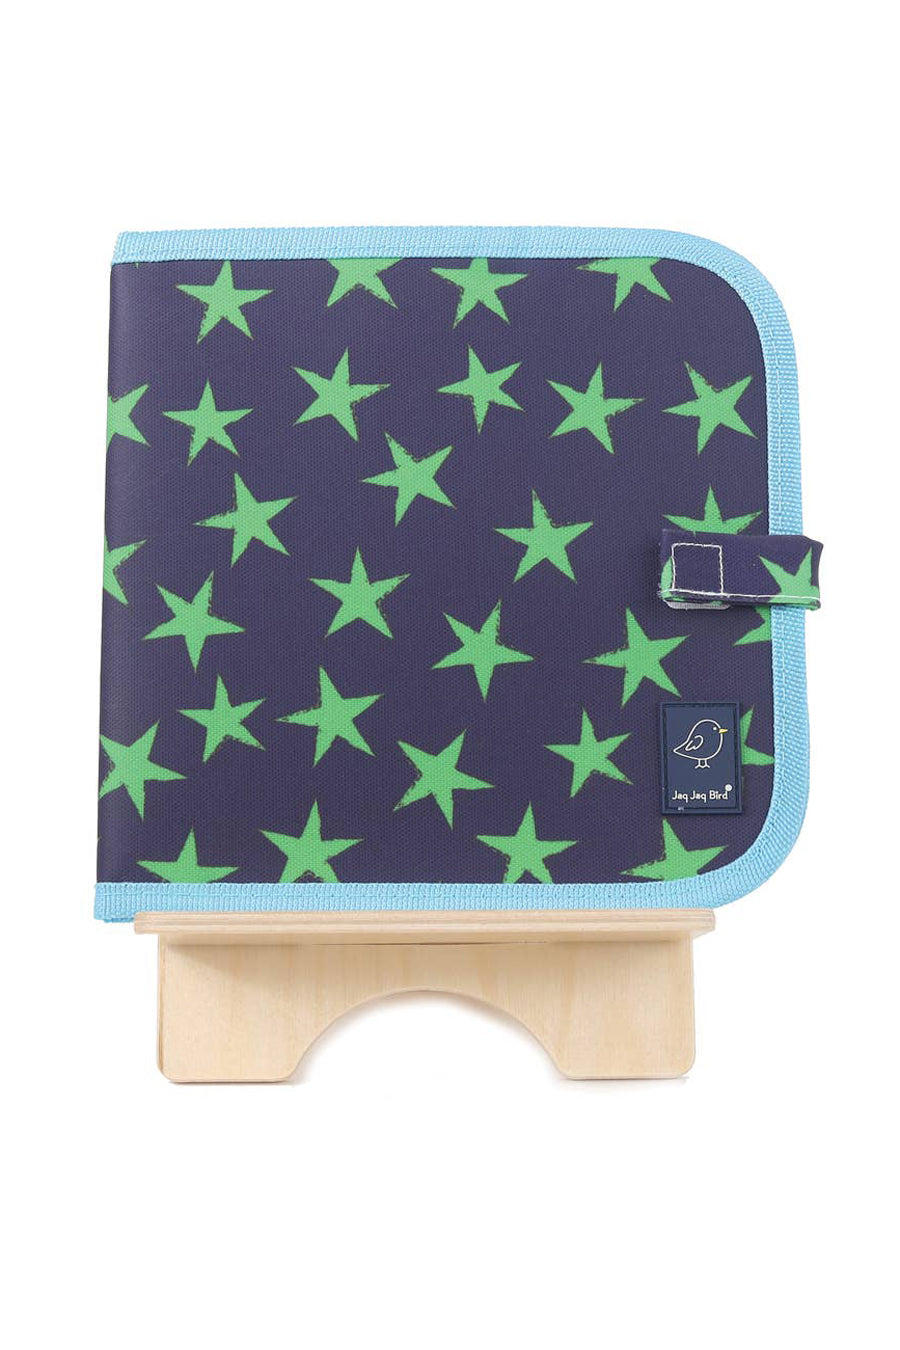 Doodle It & Go Eraseable Book | Green Stars